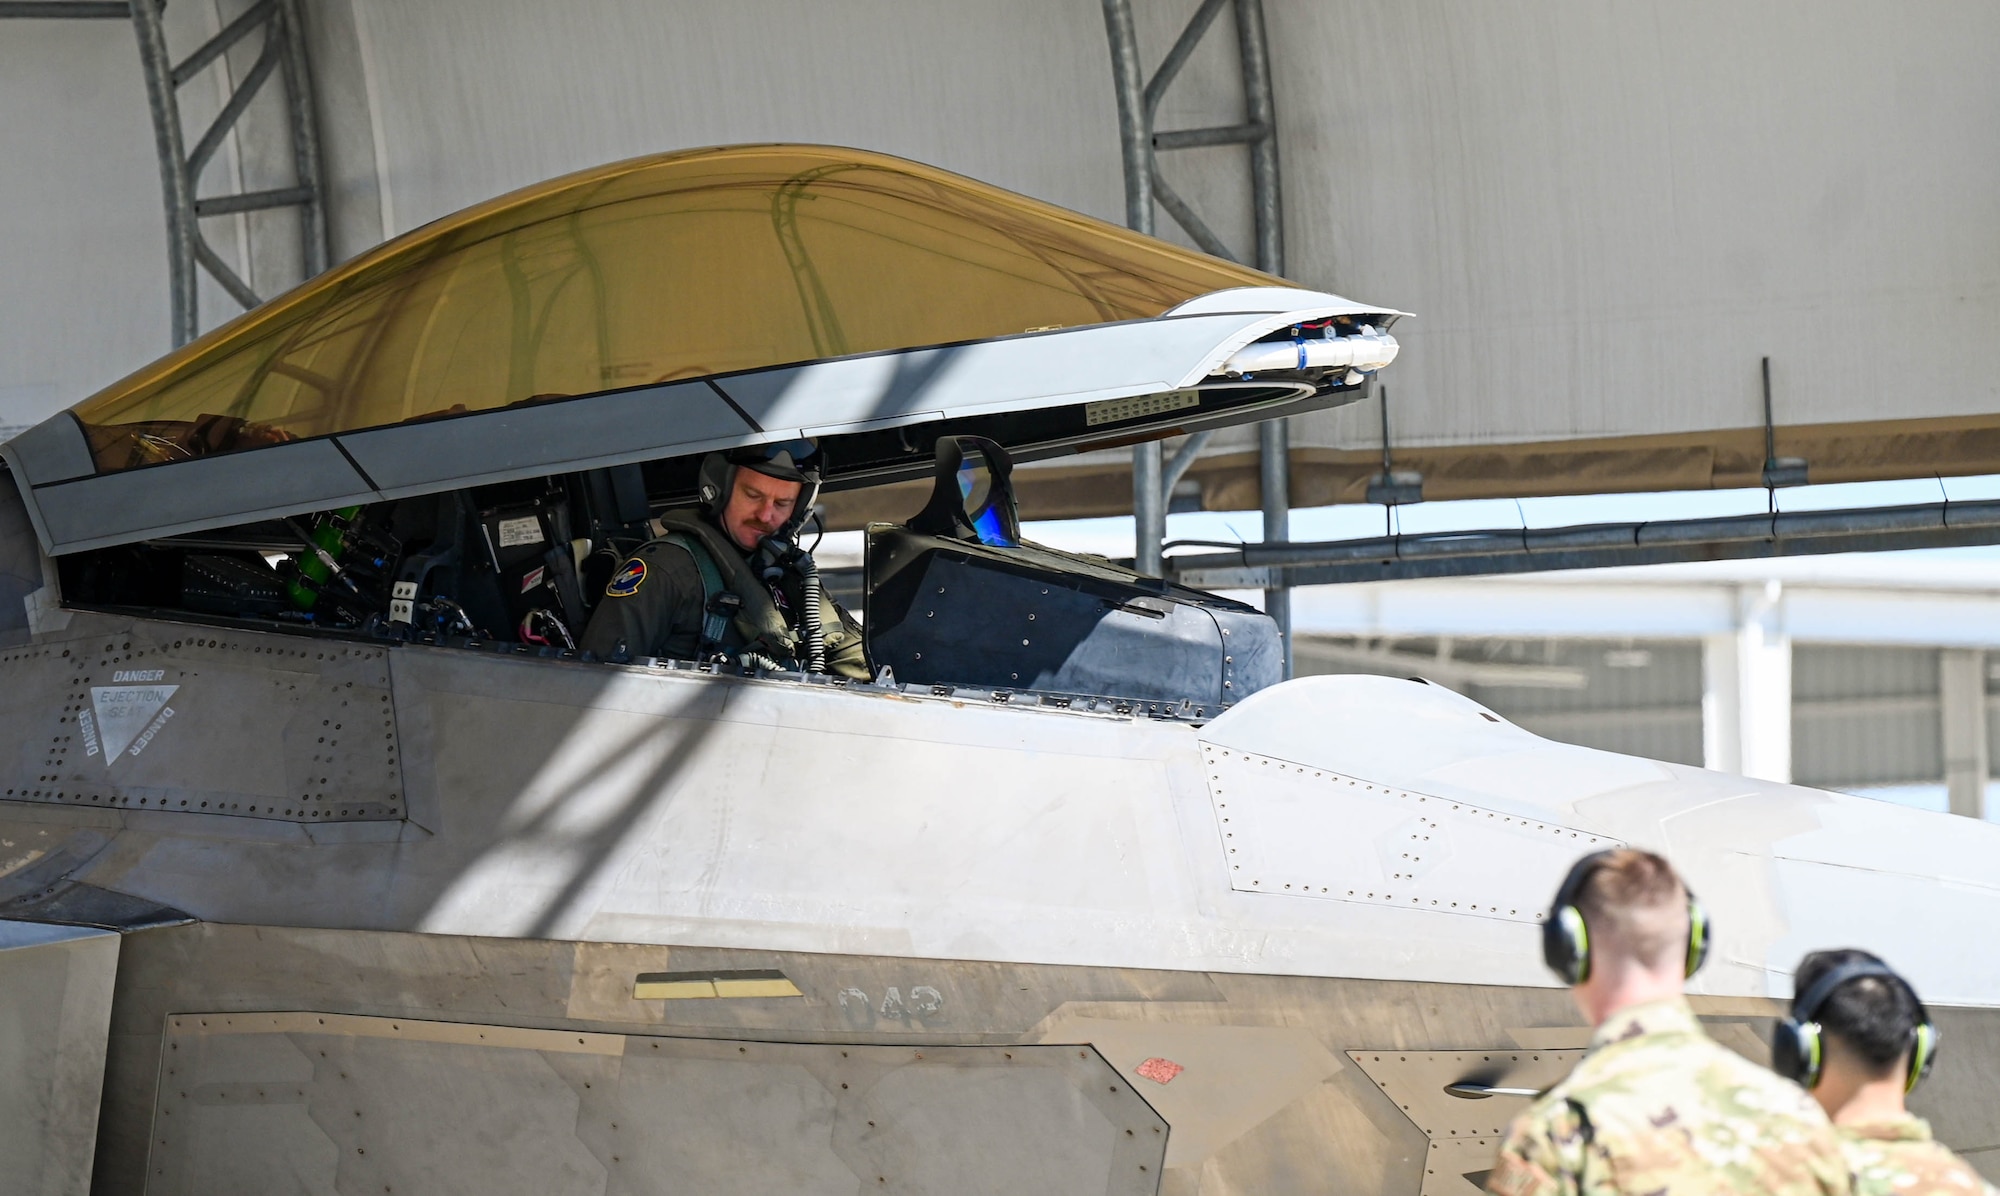 Lt. Col. Evers exits the F-22 Raptor